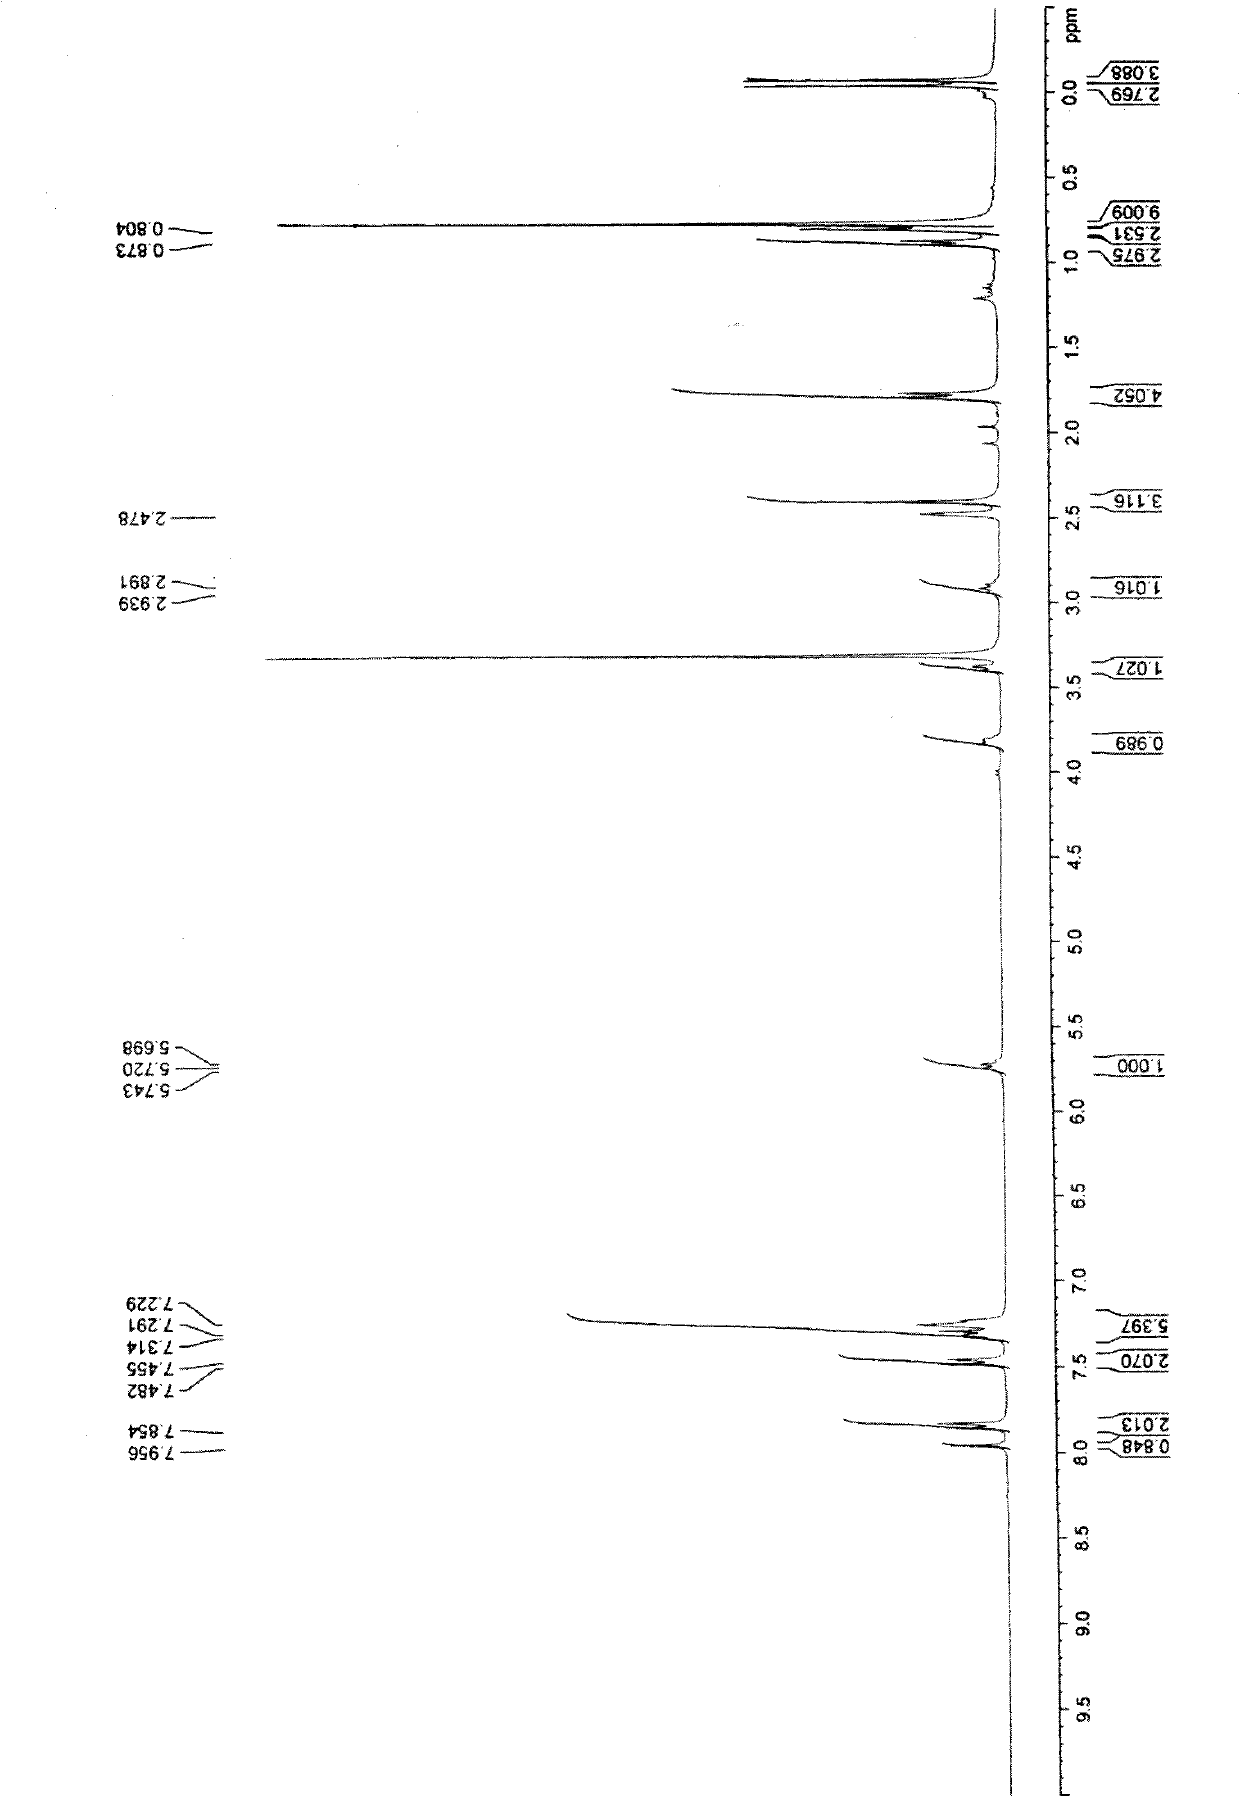 Intermediate of synthetic imipenem medicine as well as preparation method and application thereof